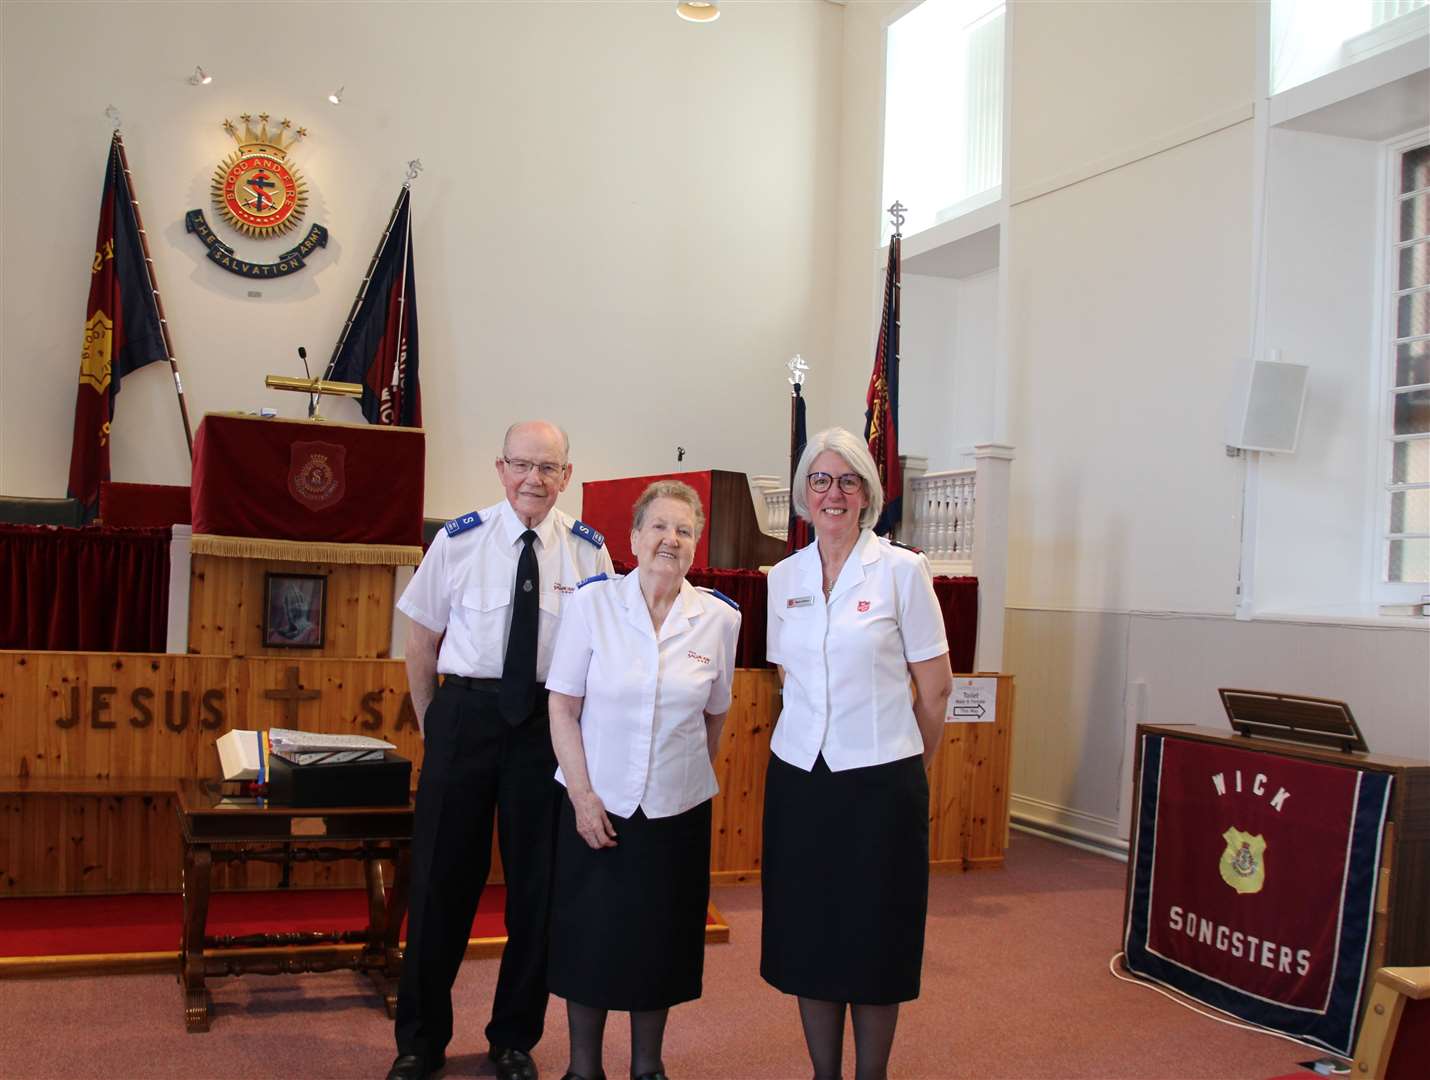 Mary Glass (centre) with her husband Jack and Cadet Diane Johnson at the Salvation Army hall in Wick. Mrs Glass was presented with flowers and a vase on the occasion of her retirement.